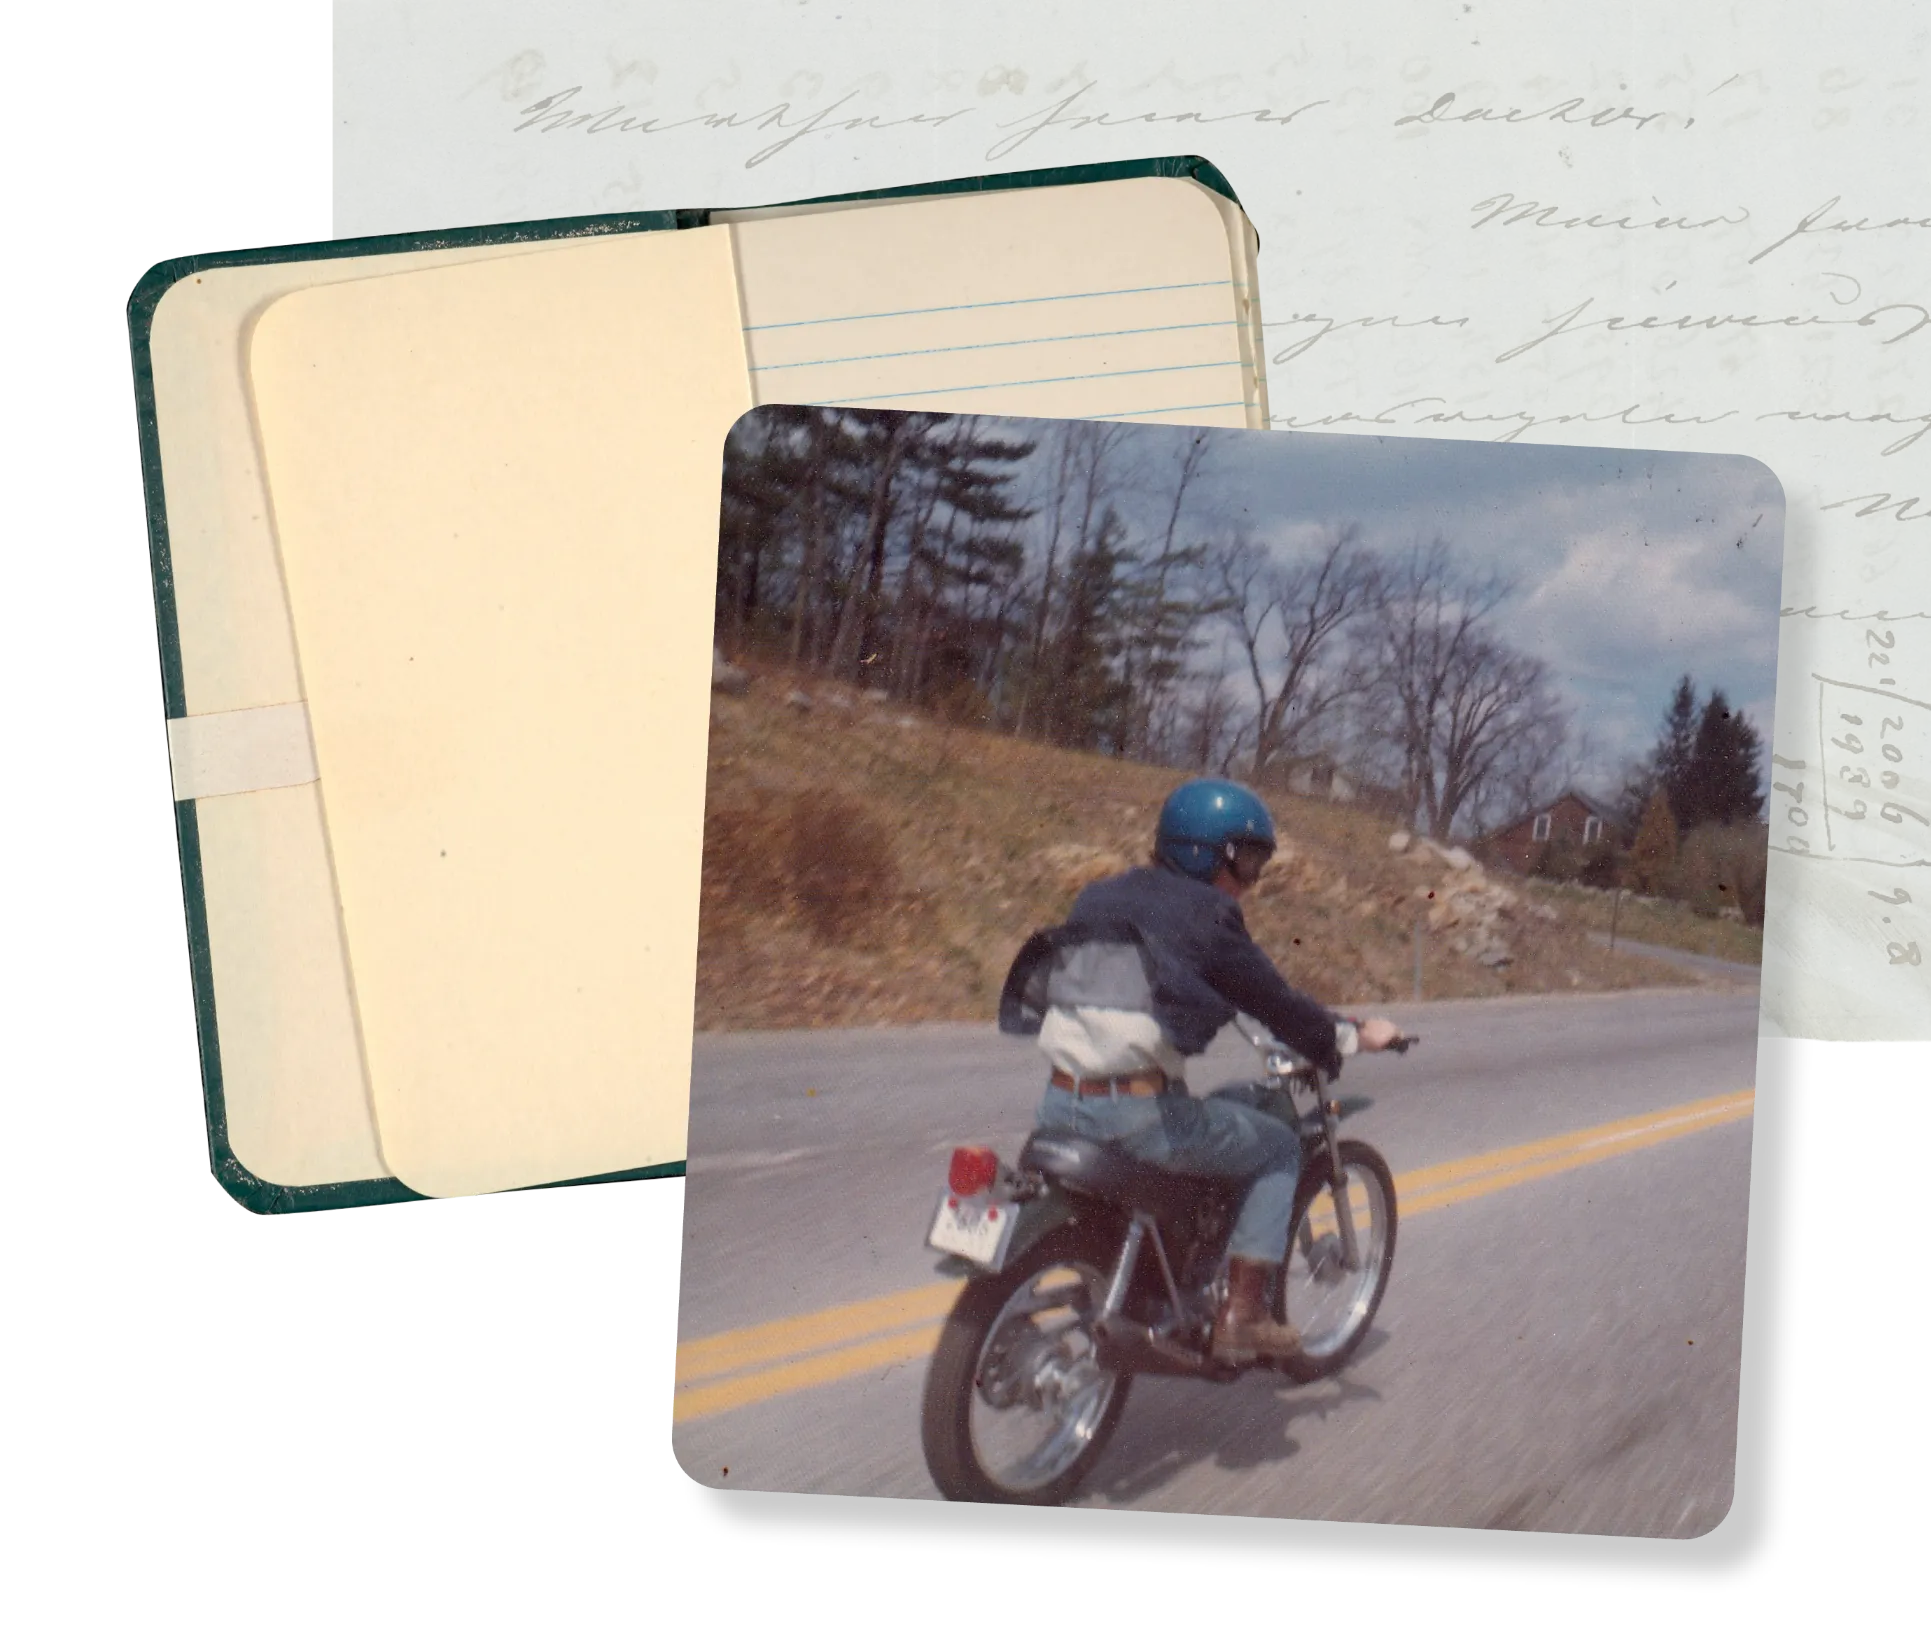 Paul Damiane riding his motorcycle with notebook and paper collage